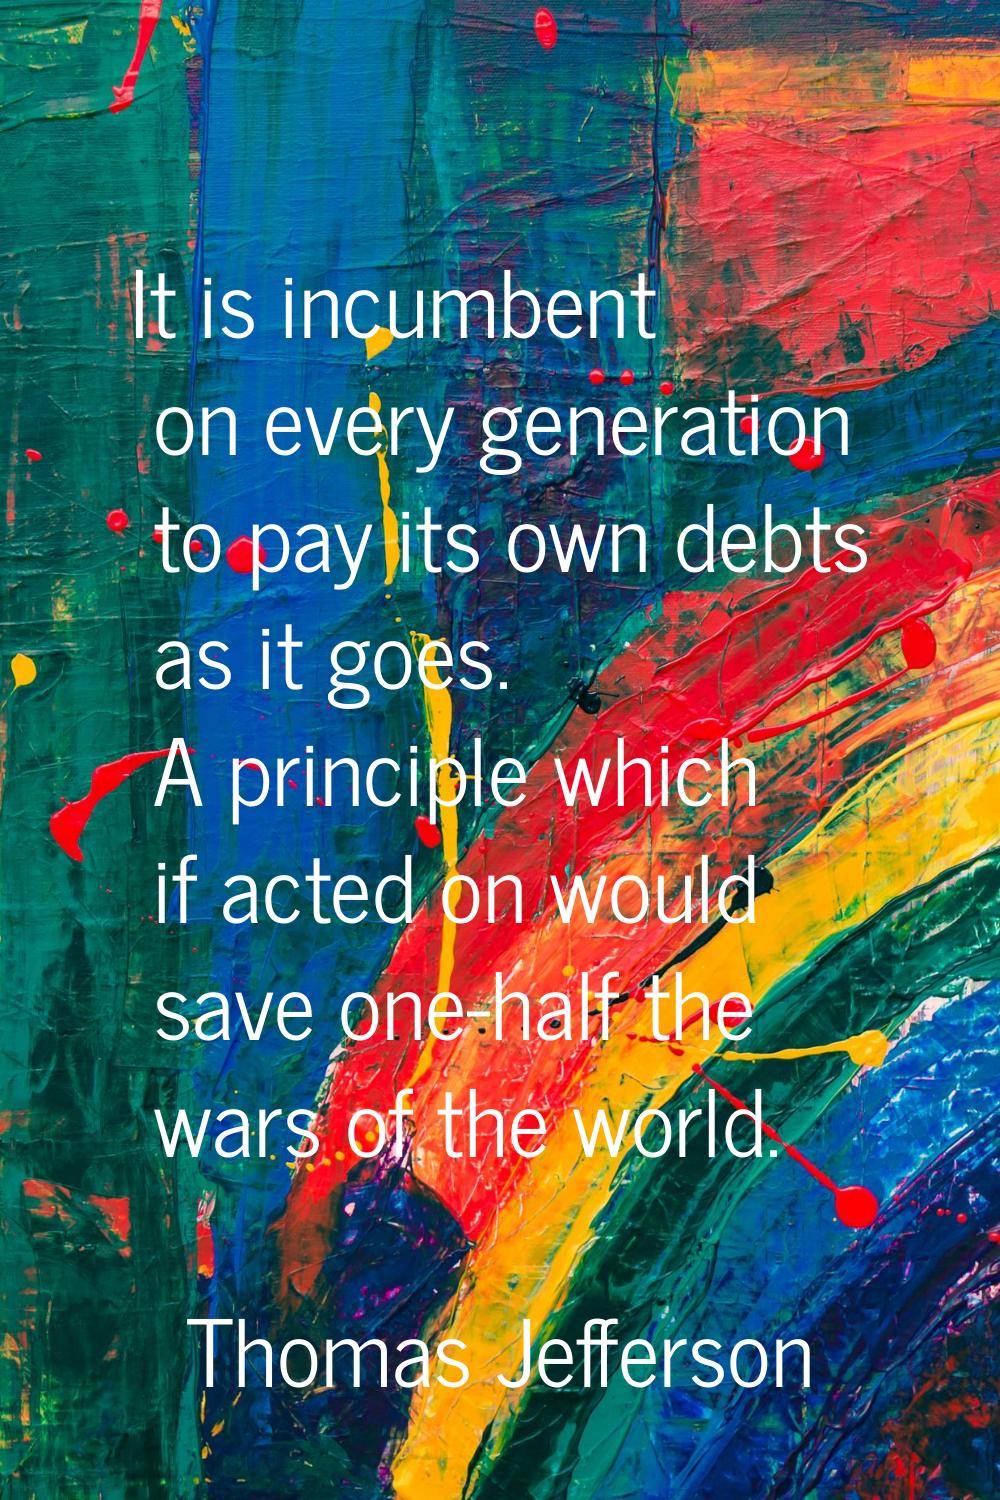 It is incumbent on every generation to pay its own debts as it goes. A principle which if acted on 